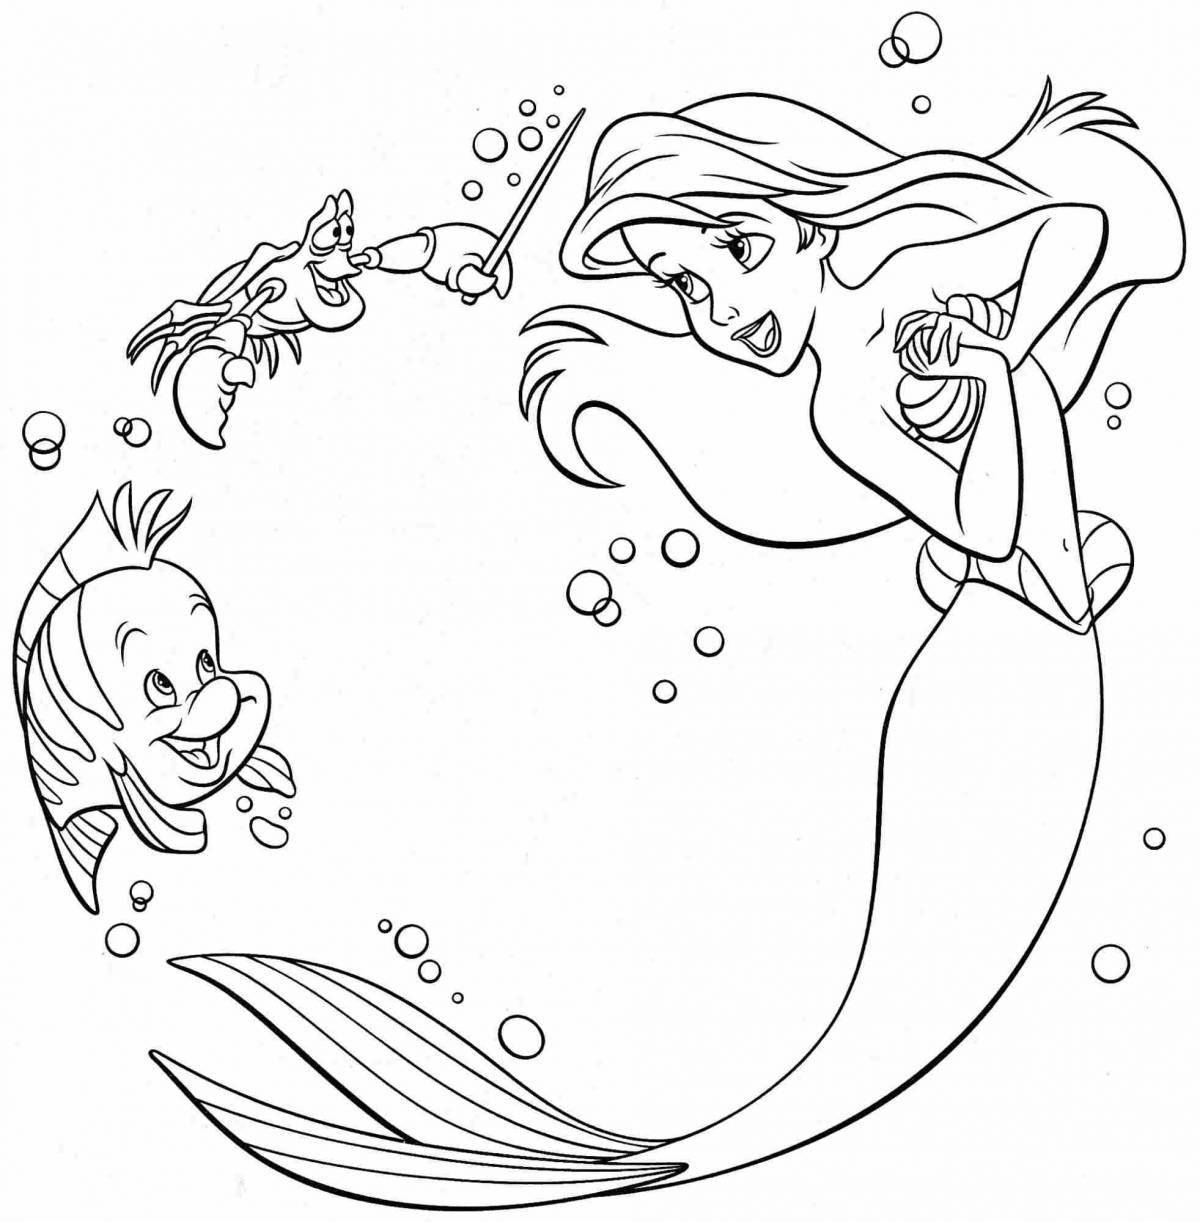 Coloring page merry little mermaid